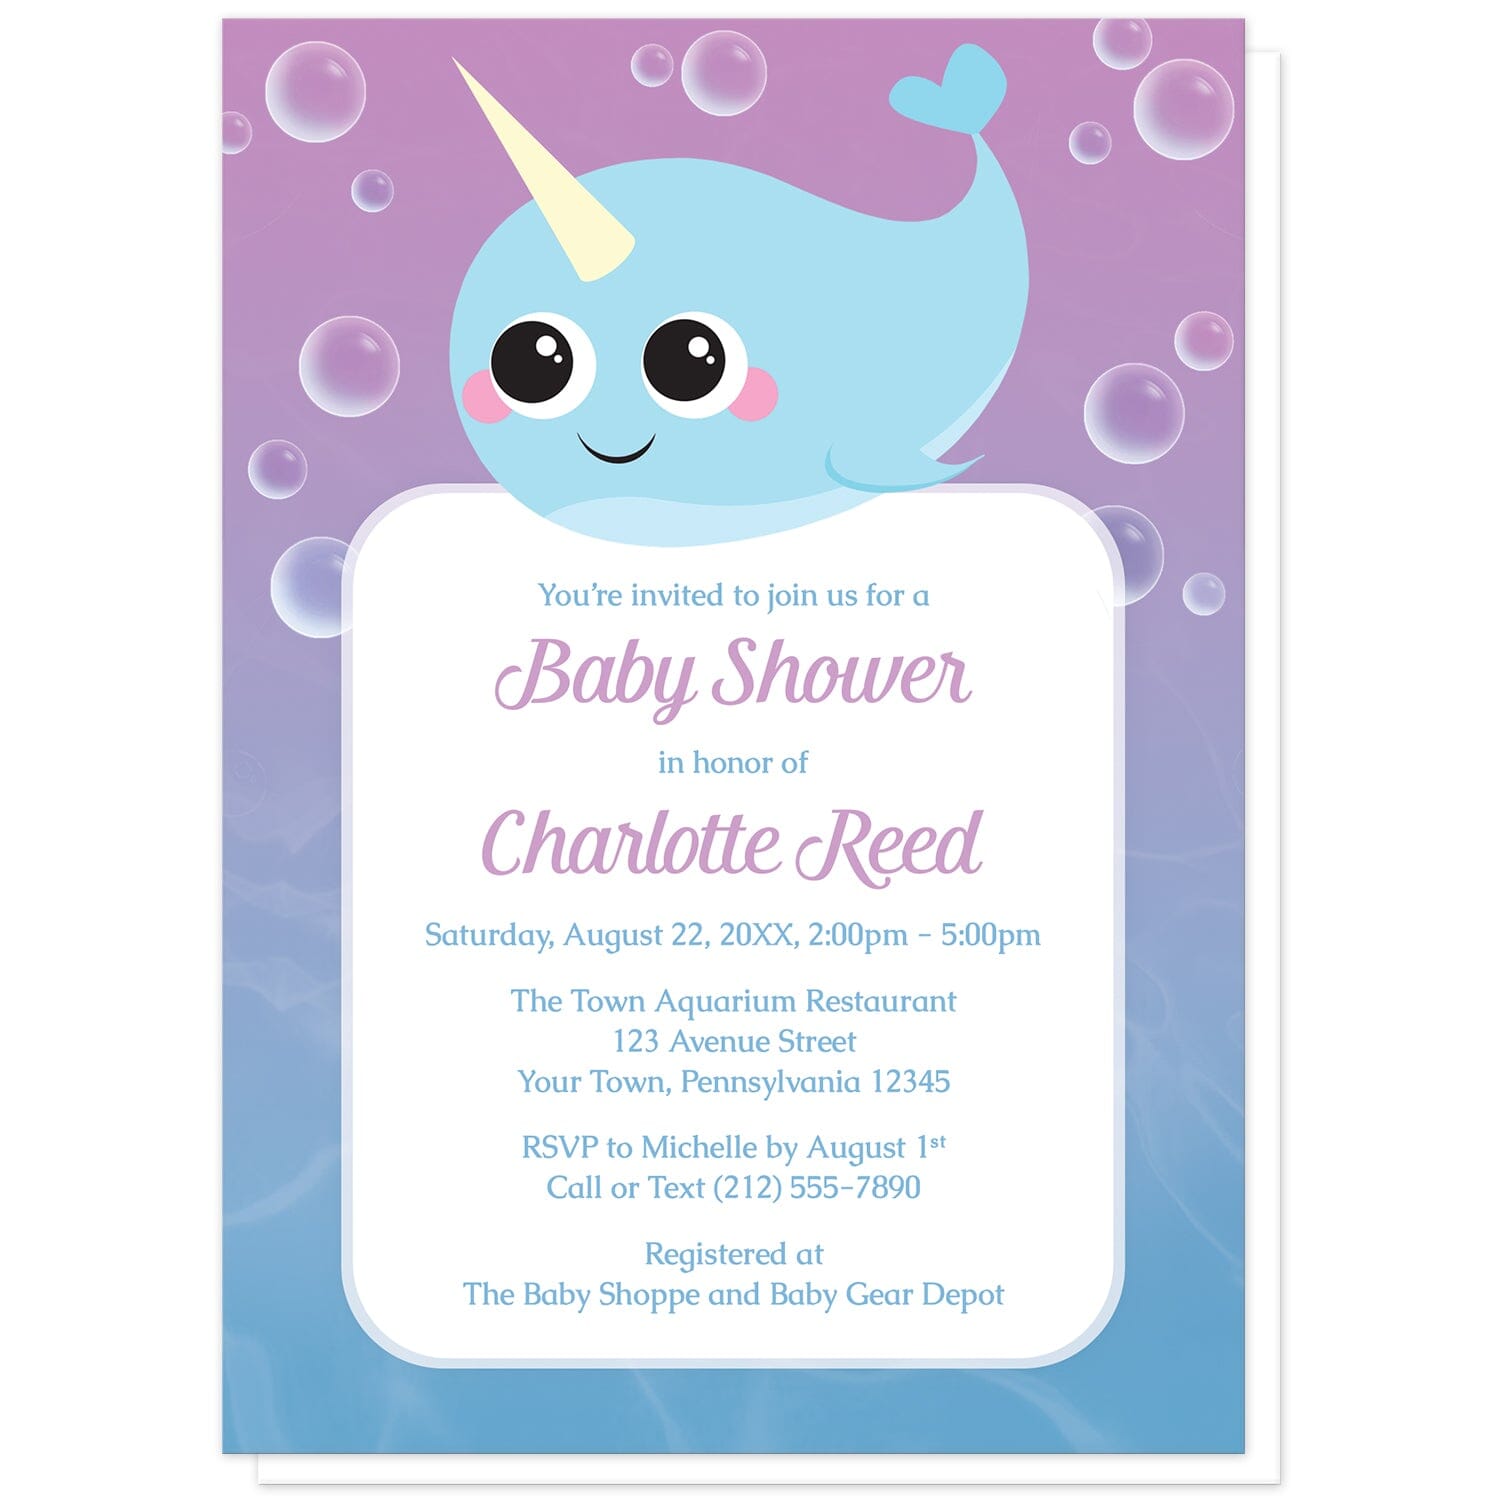 Cute Happy Narwhal Baby Shower Invitations at Artistically Invited. Cute happy narwhal baby shower invitations that are illustrated with a cute and happy blue narwhal surrounded by bubbles, over a purple to blue gradient ombre underwater background. Your personalized baby shower celebration details are custom printed in purple and blue over a white rectangular area over the gradient water background.